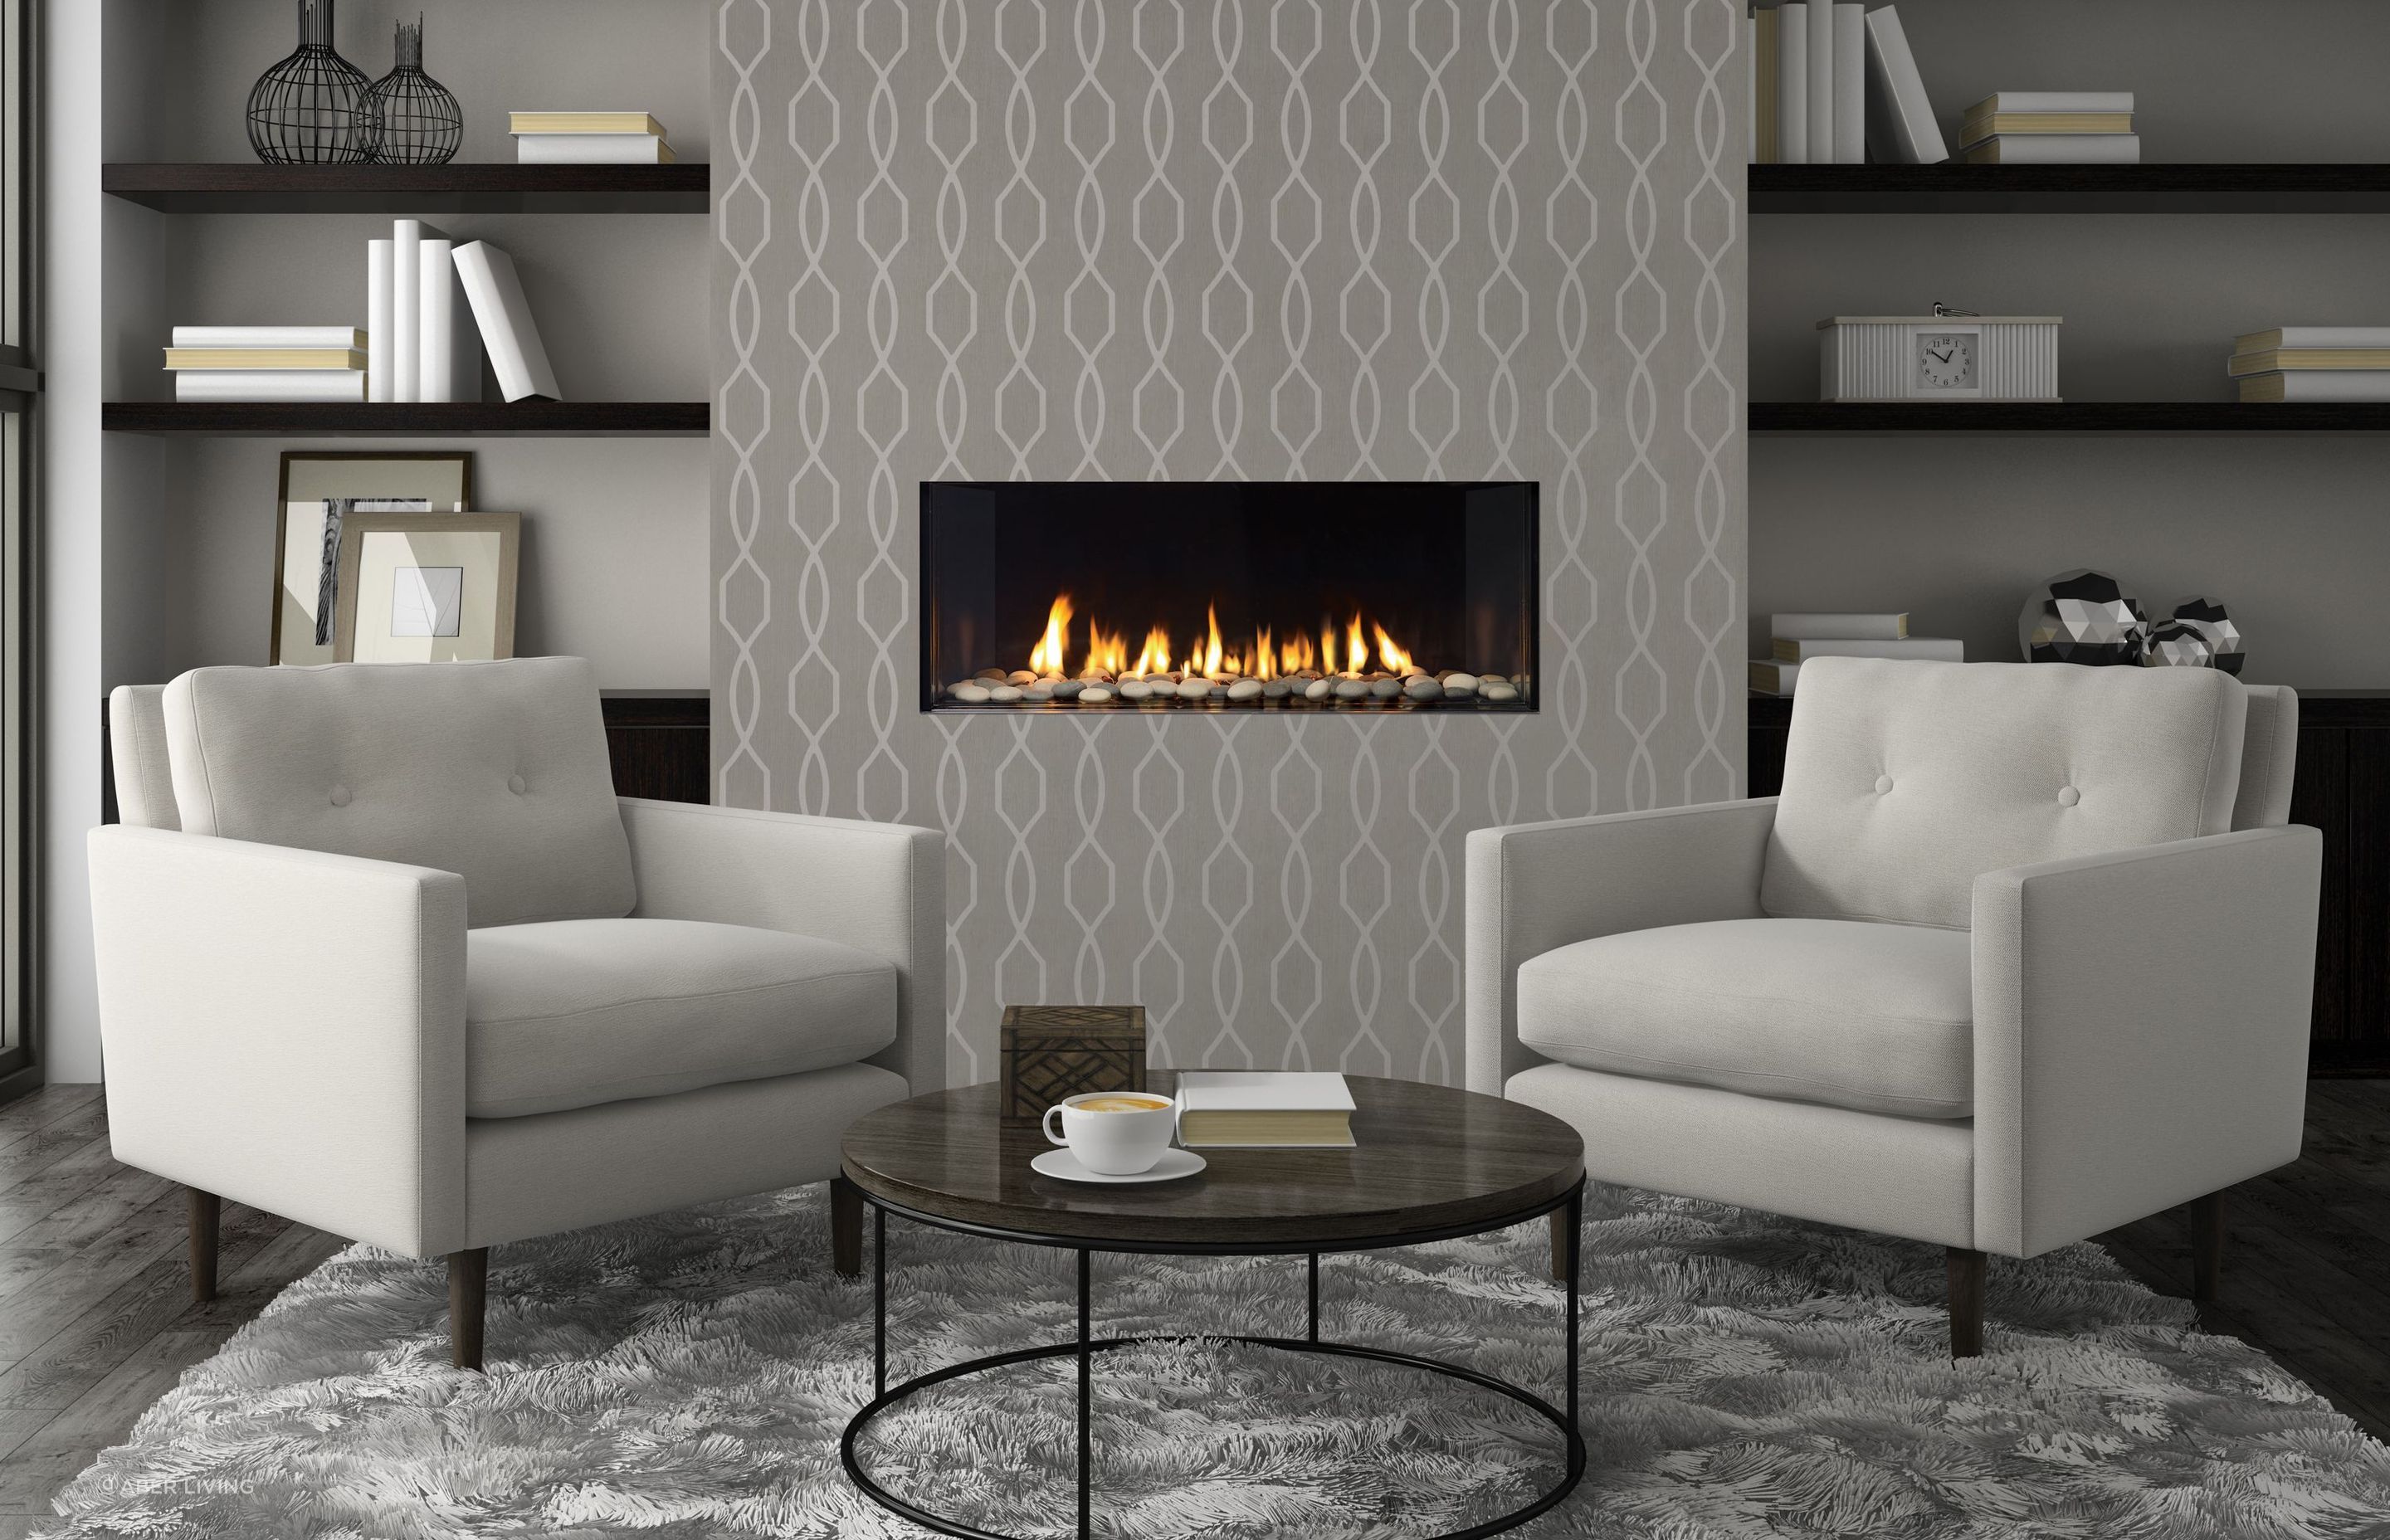 The Regency CV40E gas fireplace seamlessly integrates into any style of home decor